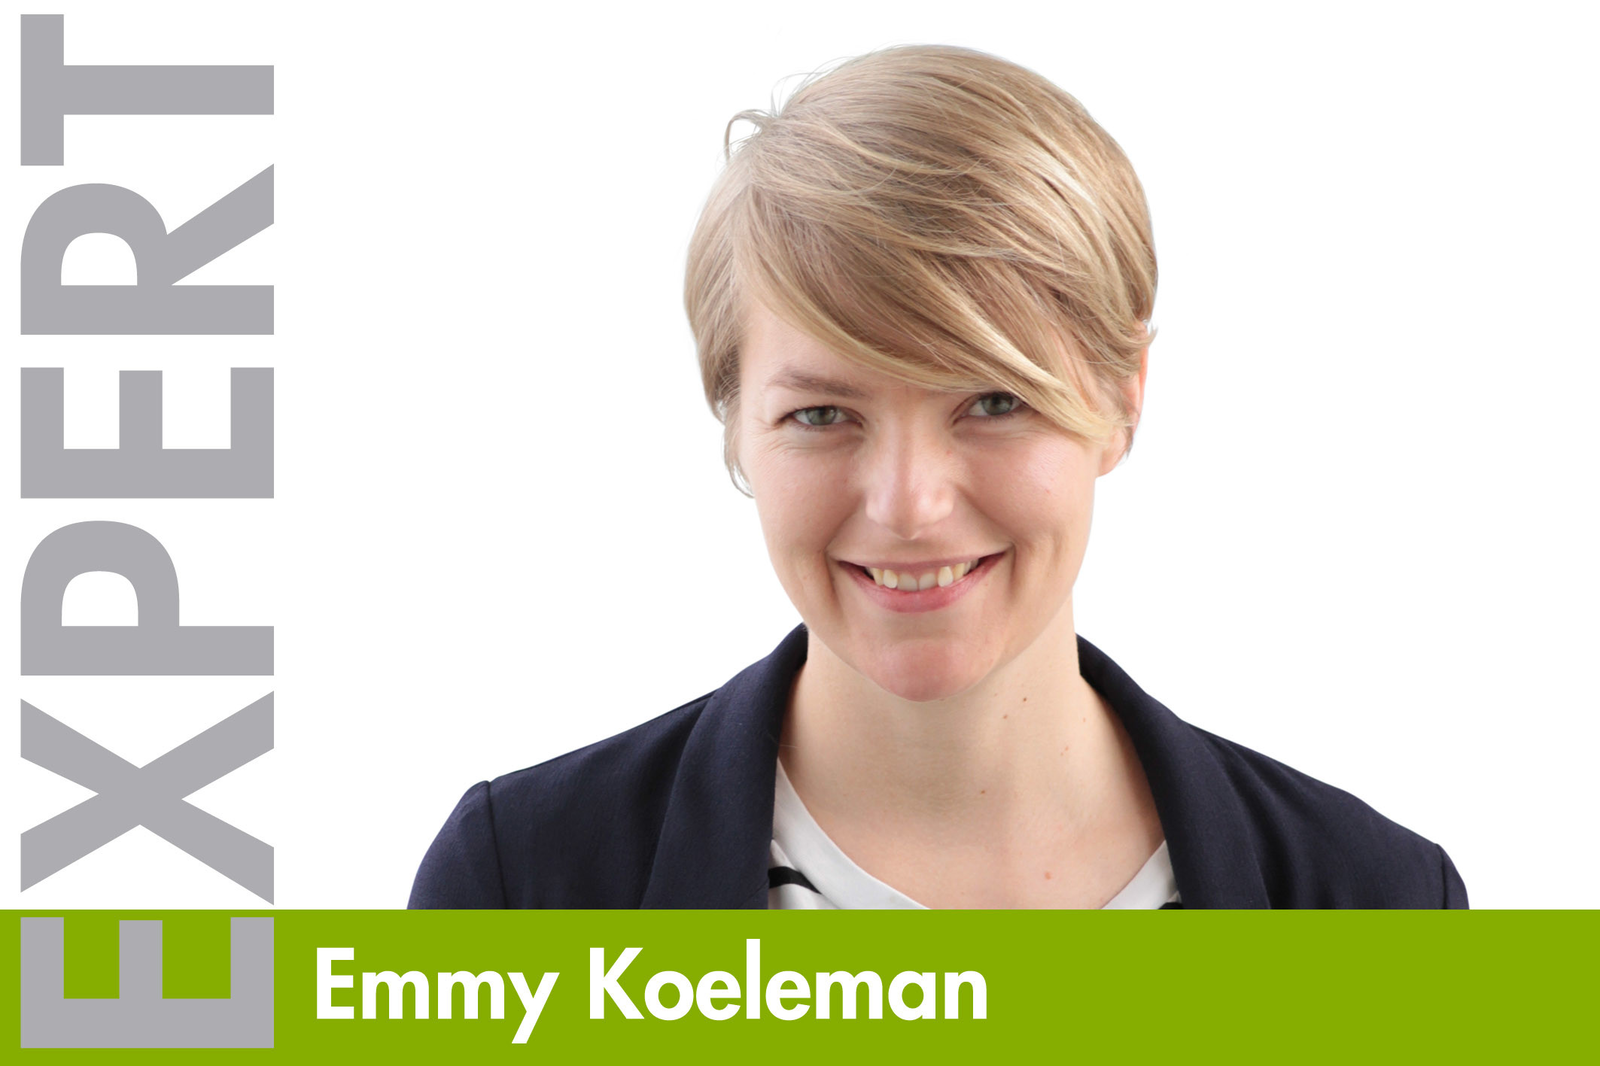 Emmy Koeleman, editor All About Feed & Dairy Global